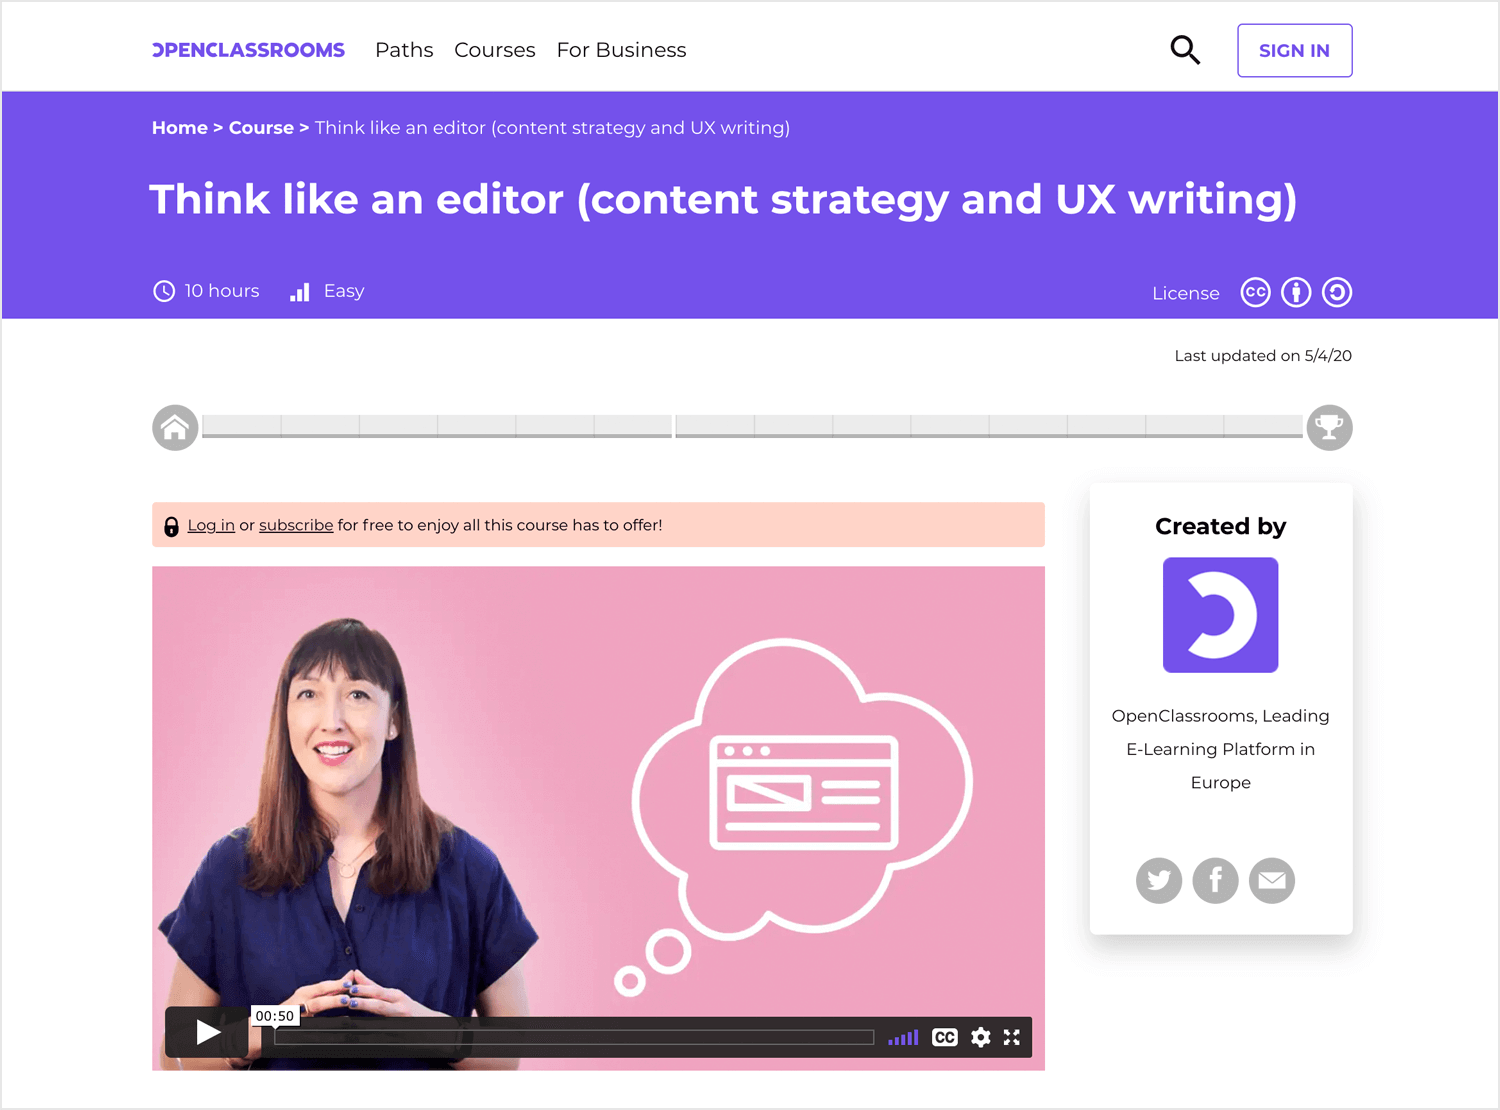 UX writing course - Think like an editor